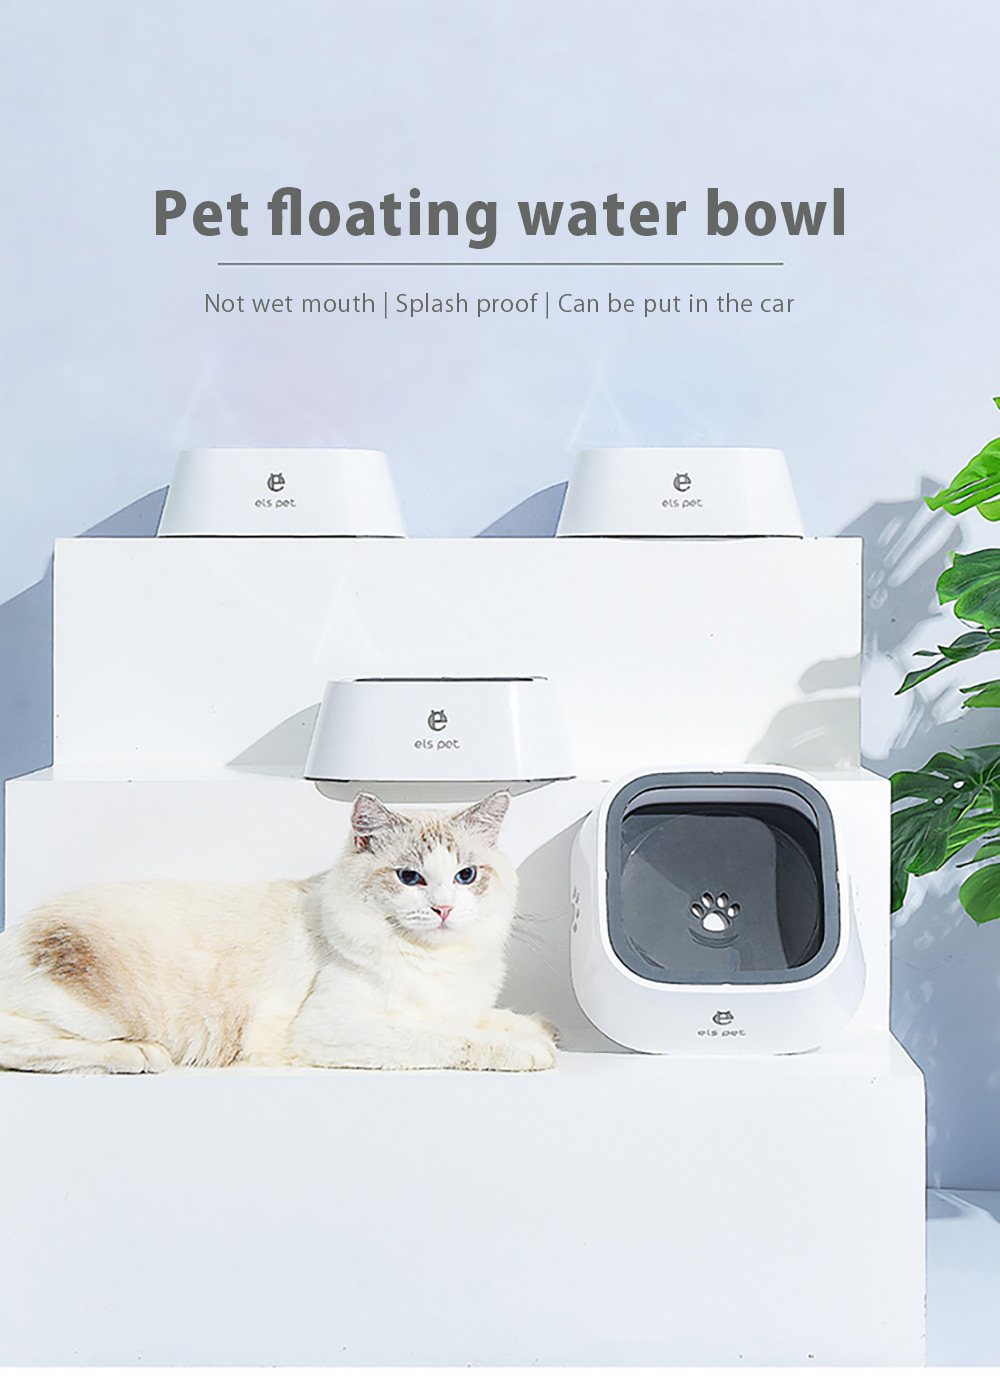 Elspet-1500ml-Dog-Water-Bowl-No-Spill-Cat-Slow-Water-Feeder-Vehicle-Carried-Floating-Disk-Pet-Suppli-1949019-2